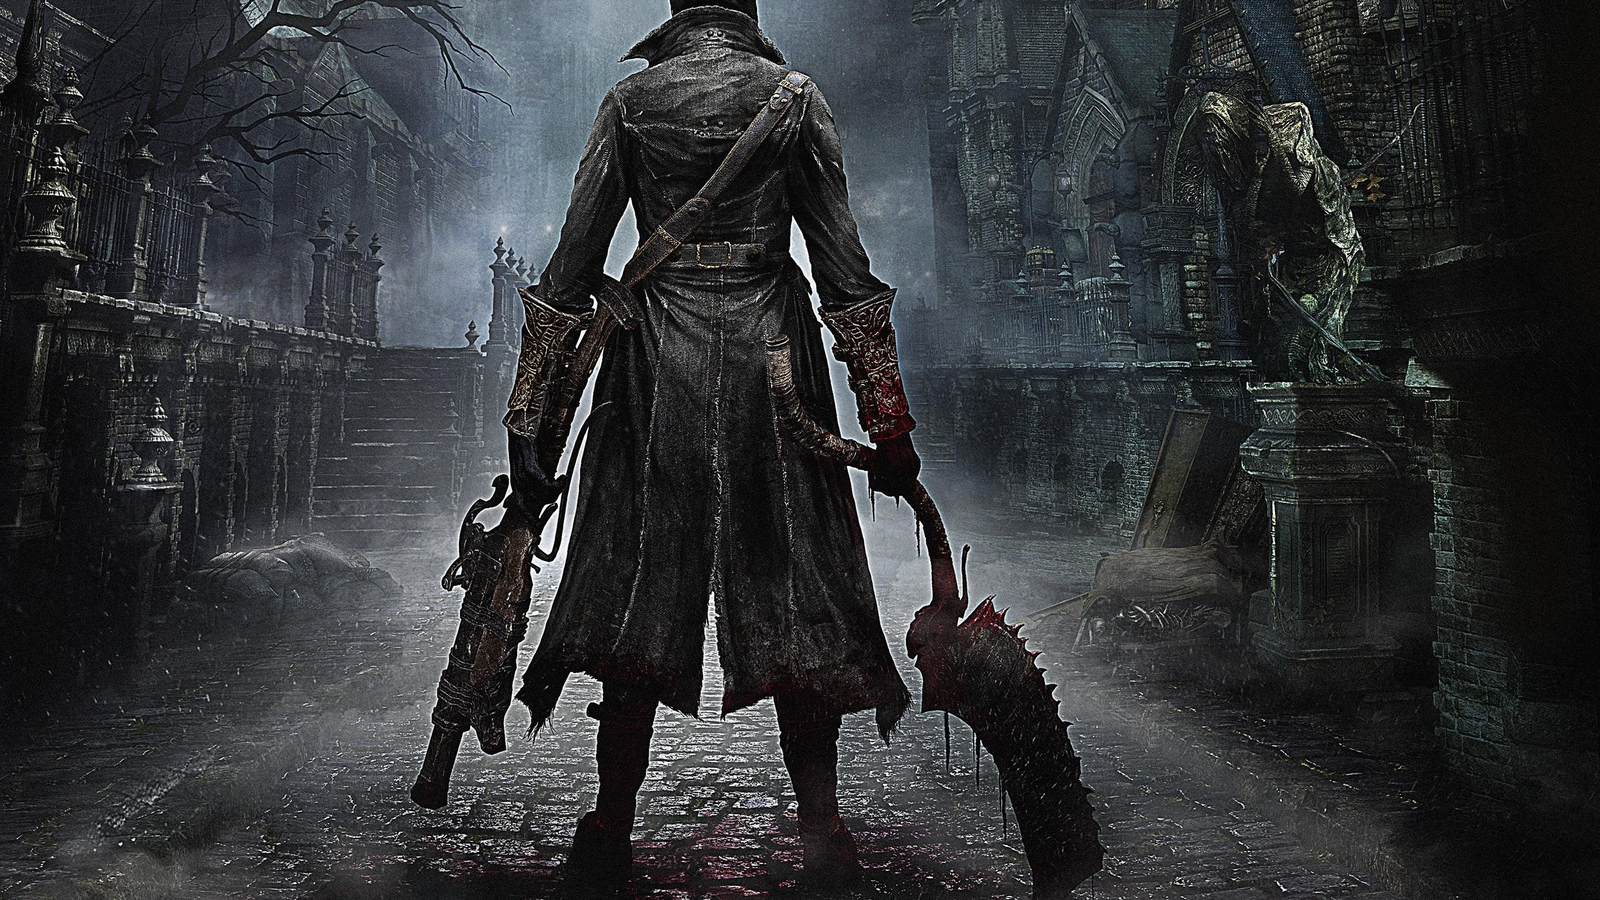 Is From Software Working On Bloodborne 2